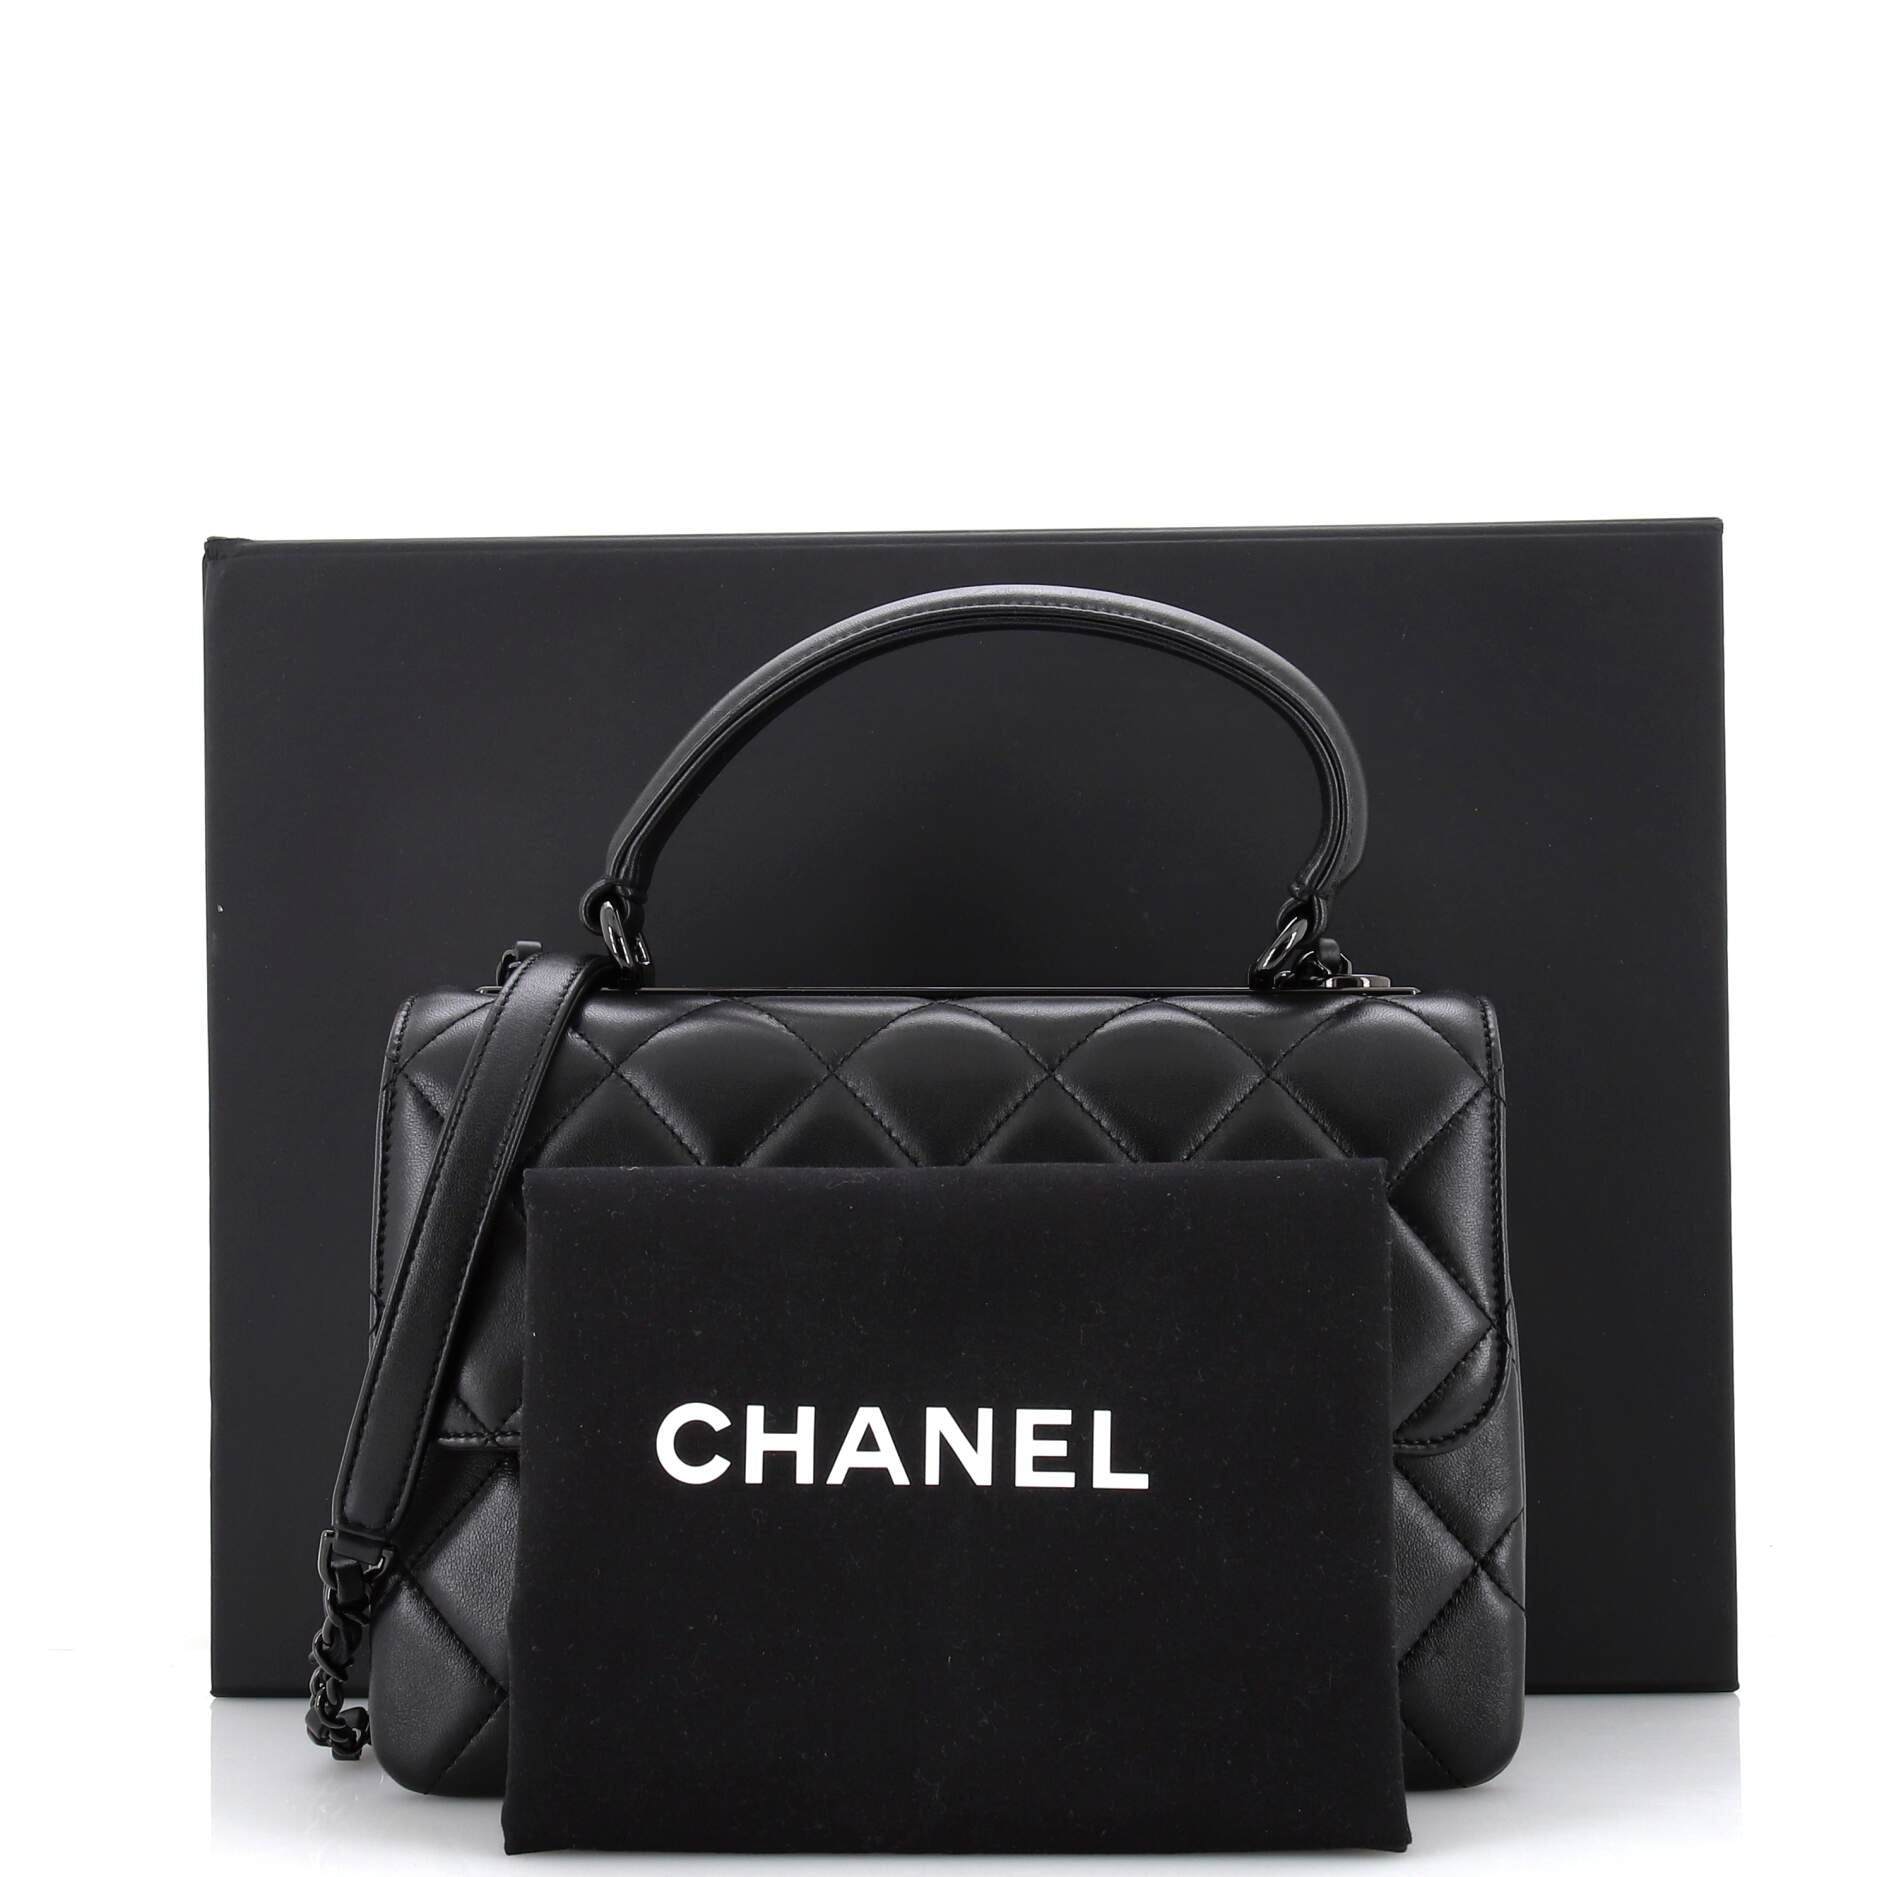 Chanel Black Quilted Calfskin Leather Medium Coco Luxe Top Handle Flap Bag